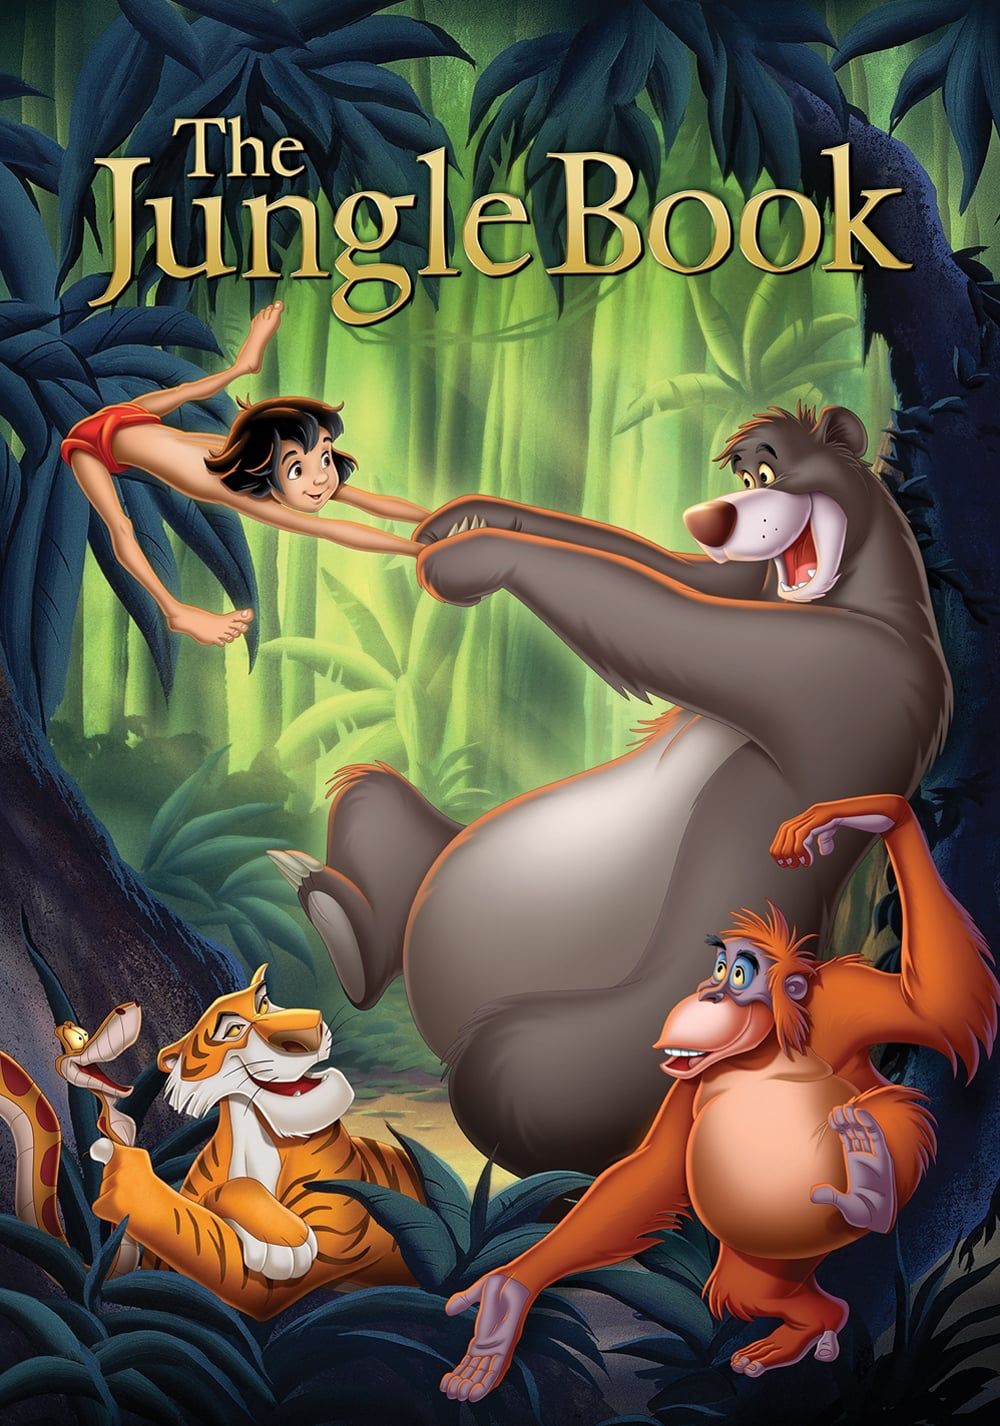 The Jungle Book 1967 Movie Poster